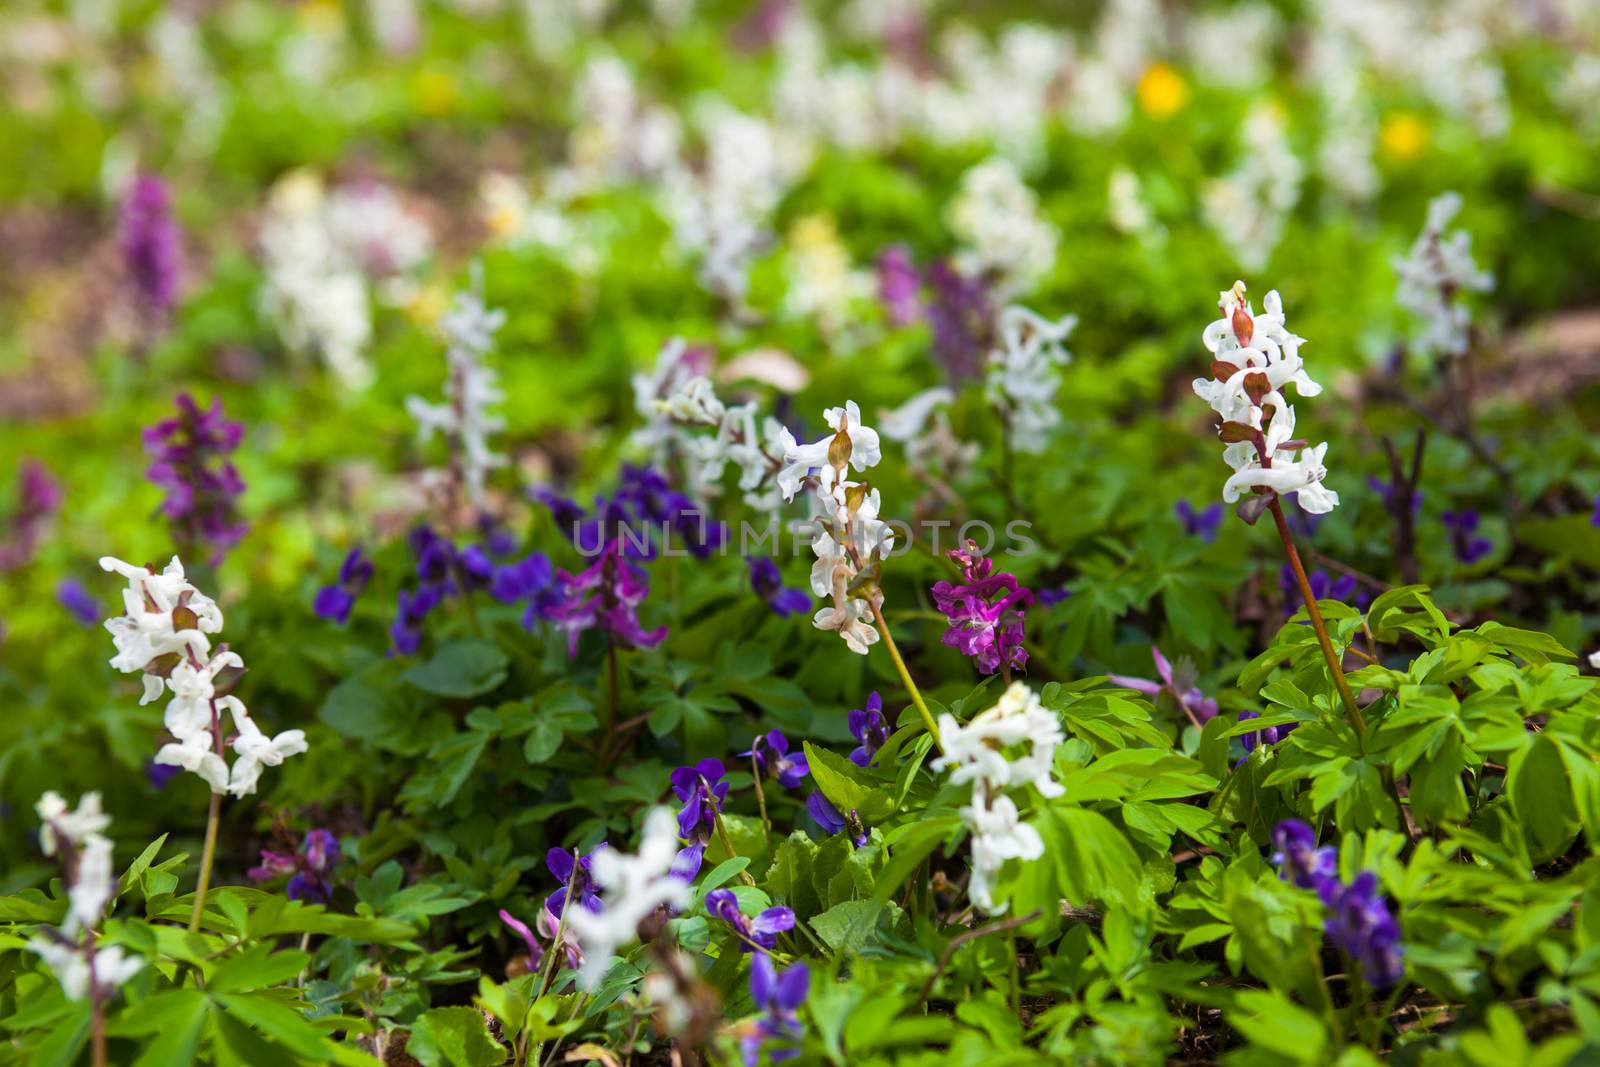 Meadow with Corydalis flowers of different colors